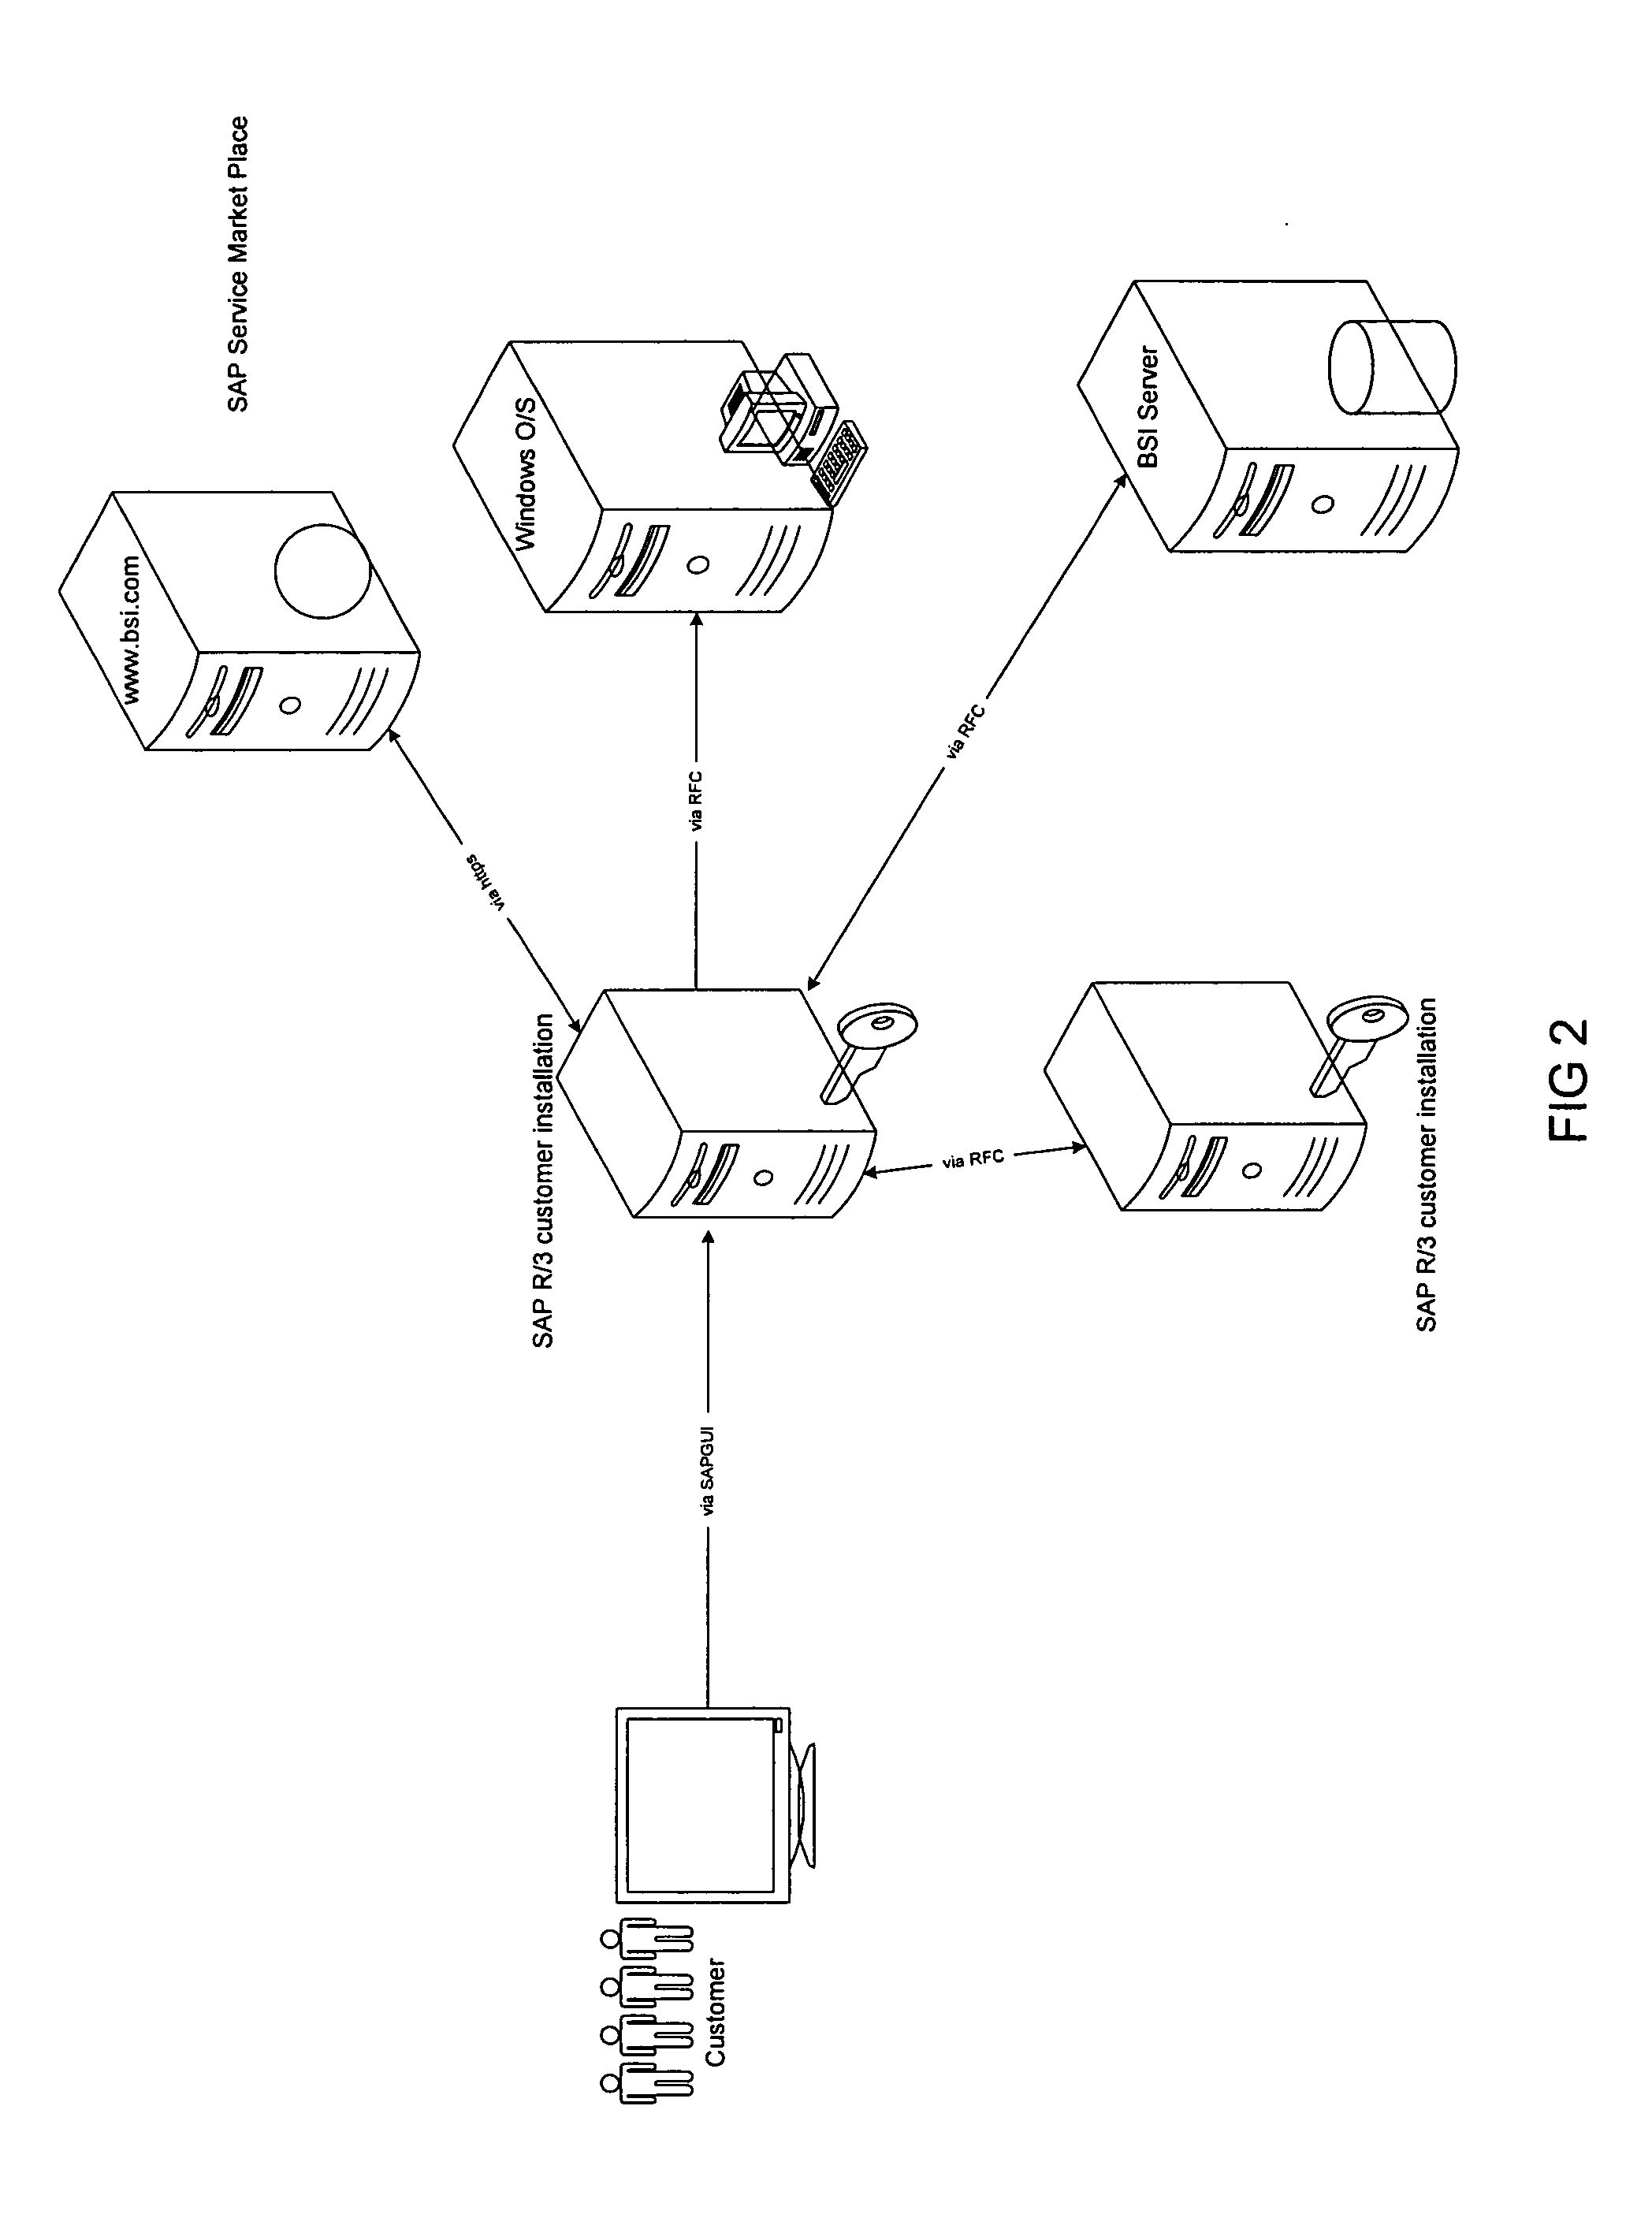 Method and system for assisting in compiling employee tax deduction